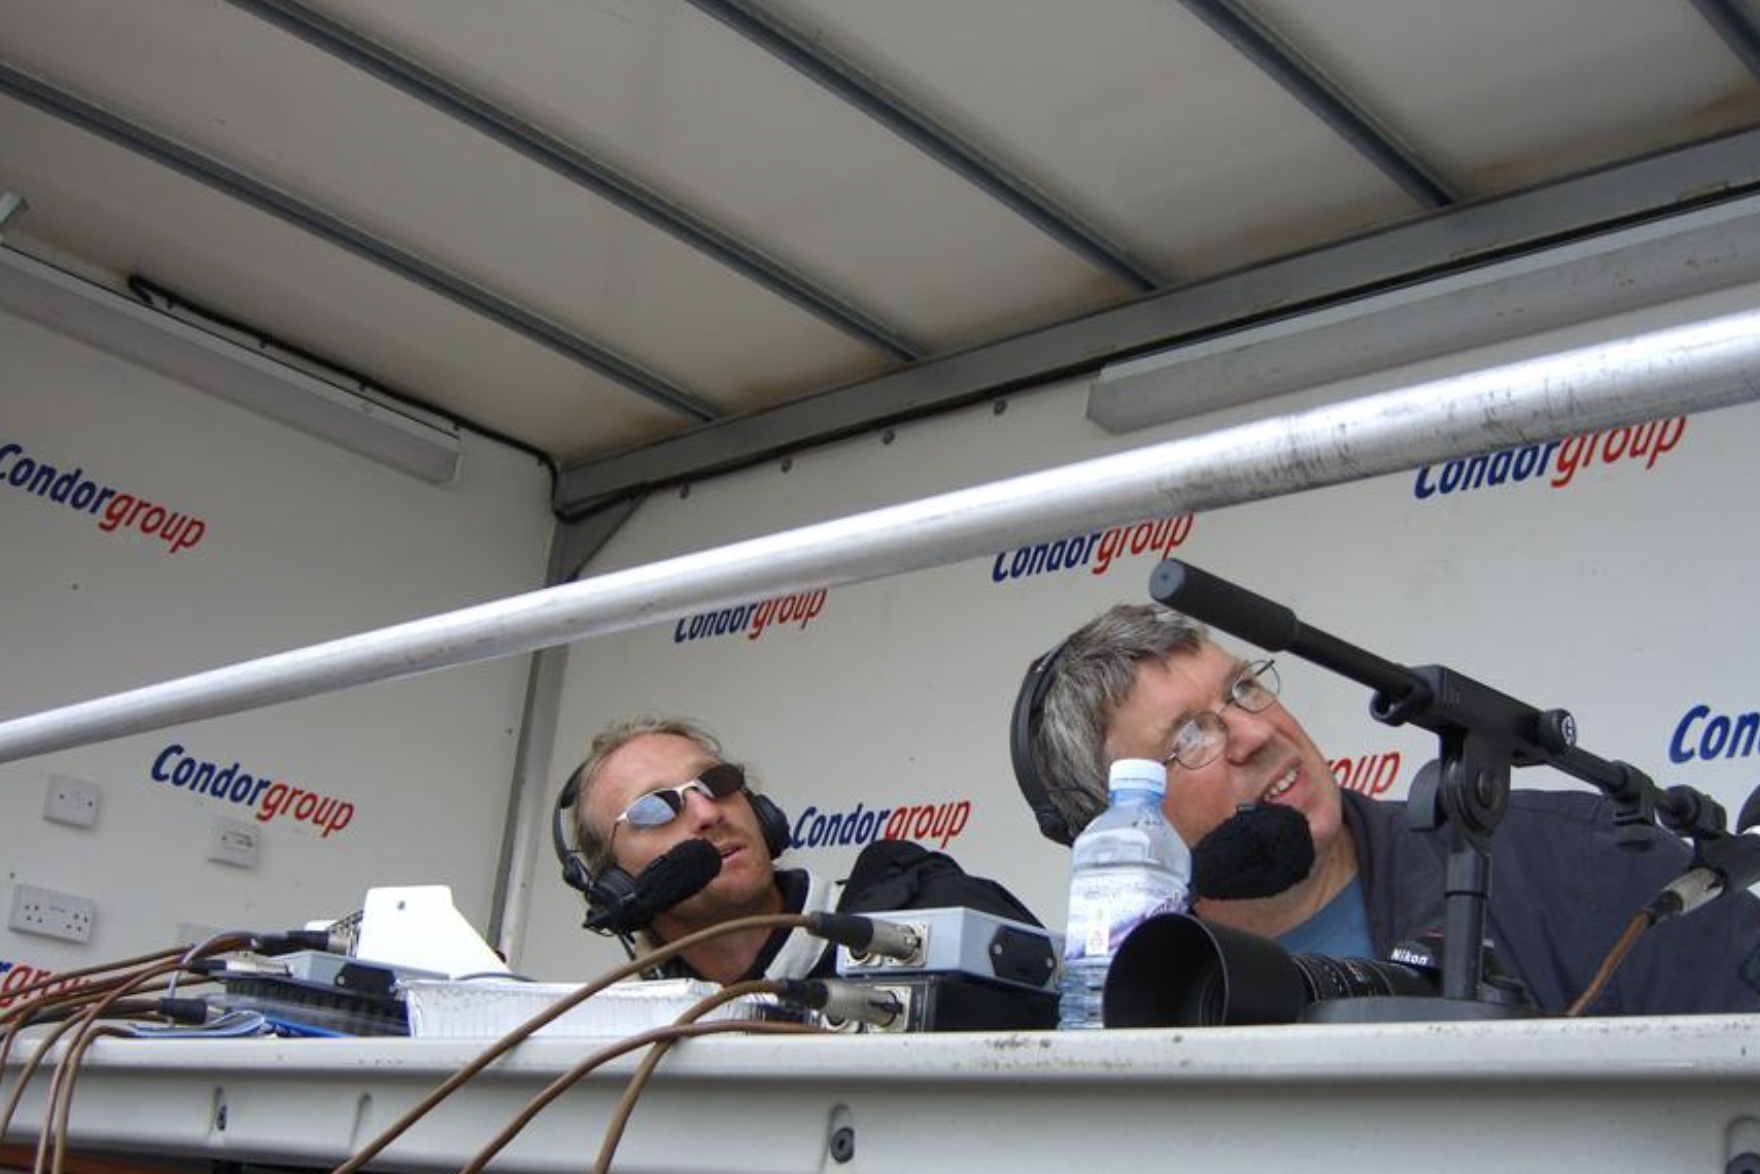 Melvyn_and_Chris_Stone_Commentating_Jersey.jpg